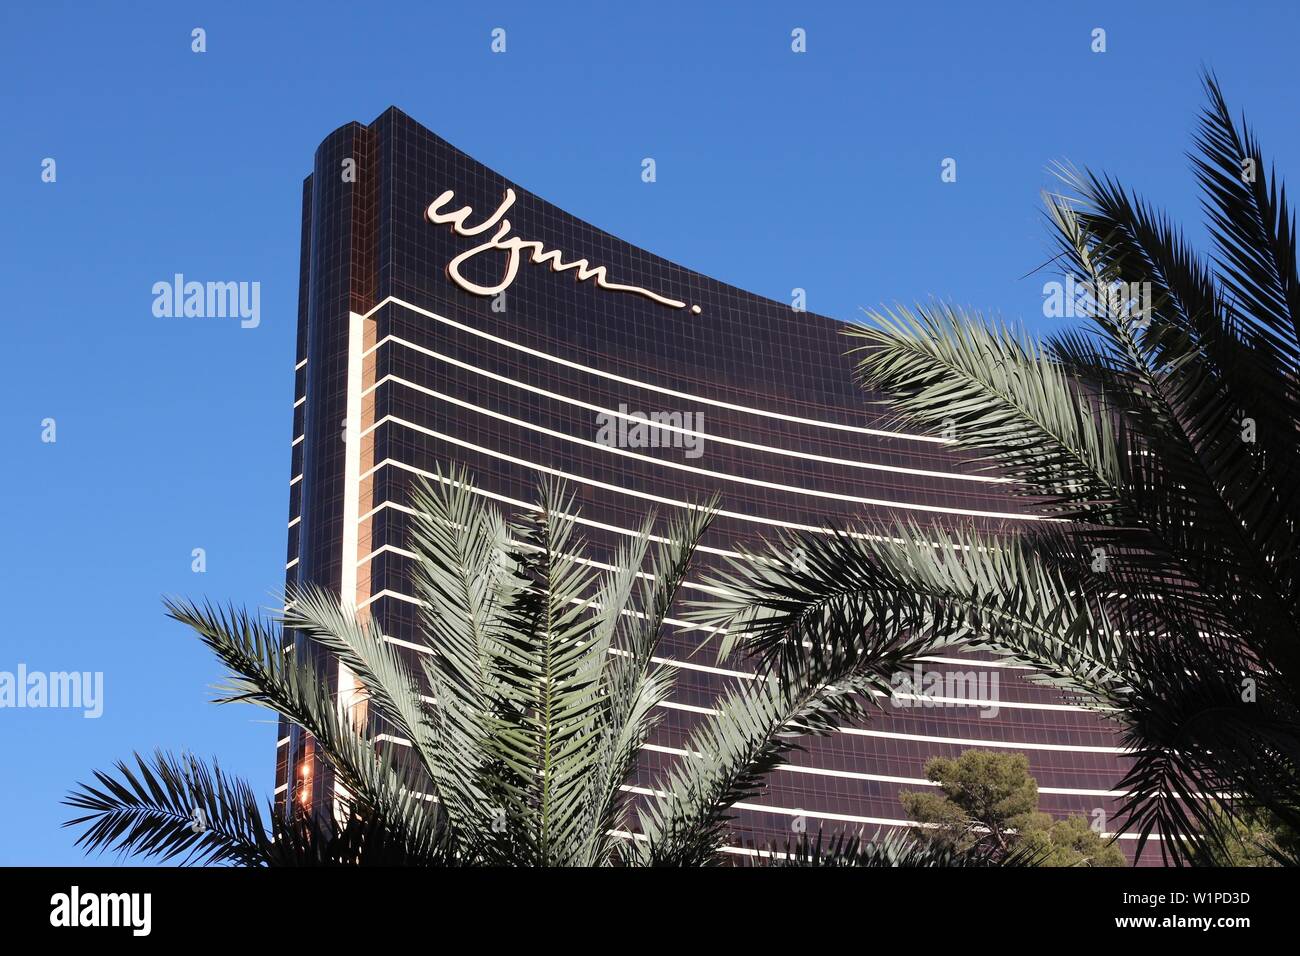 LAS VEGAS, USA - APRIL 14, 2014: Wynn resort in Las Vegas. It is one of 20 largest hotels in the world with 4,750 rooms (together with adjacent Encore Stock Photo